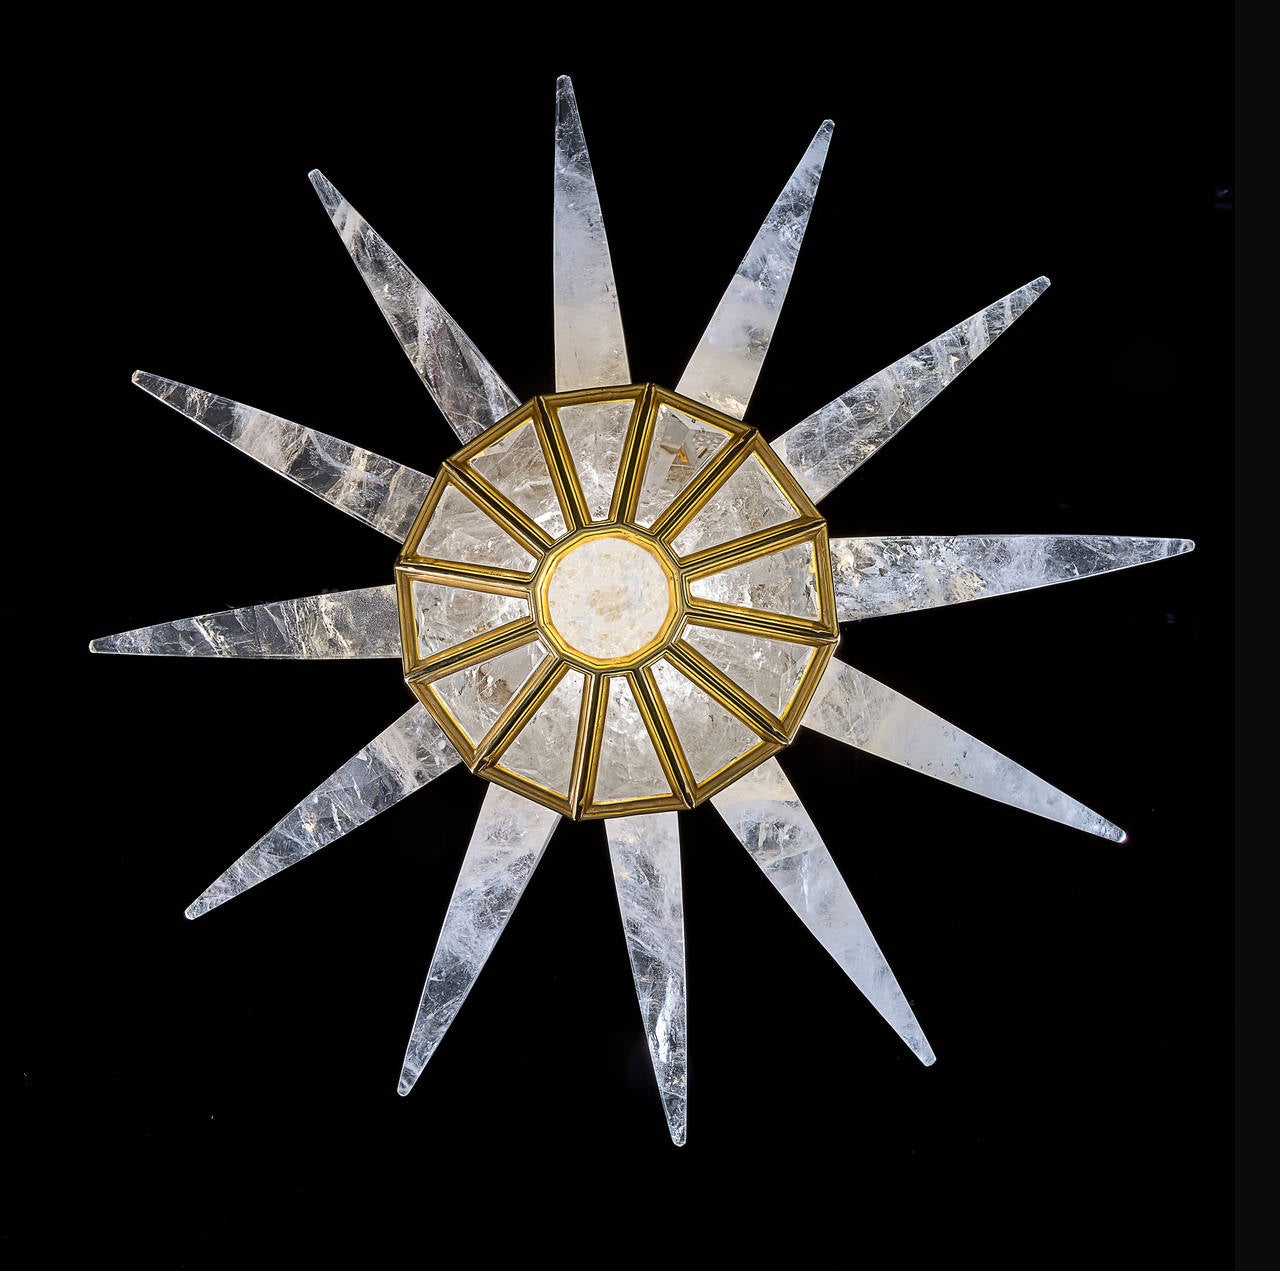 A museum quality, handmade rock crystal light fixture. Each prism is square cut from a single block of personally selected rock crystal. 

Available finishes: Silver, Antique Brass, Gold, Black Nickel, Cannon Grey & Palladium
[palladium is a